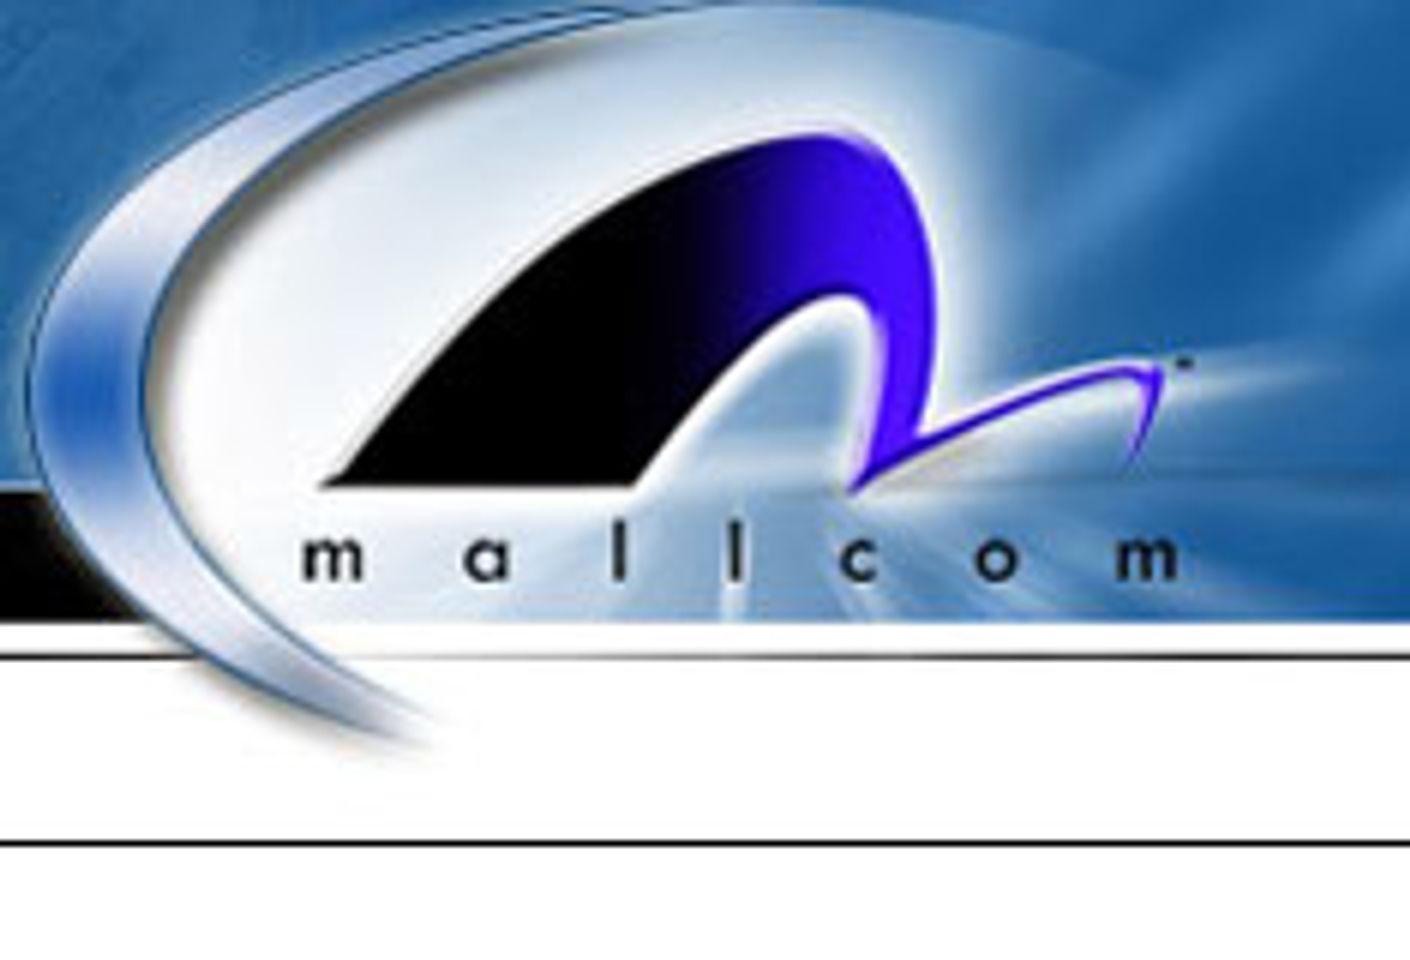 MALLcom Redesigns Site, New Features On the Way - Online